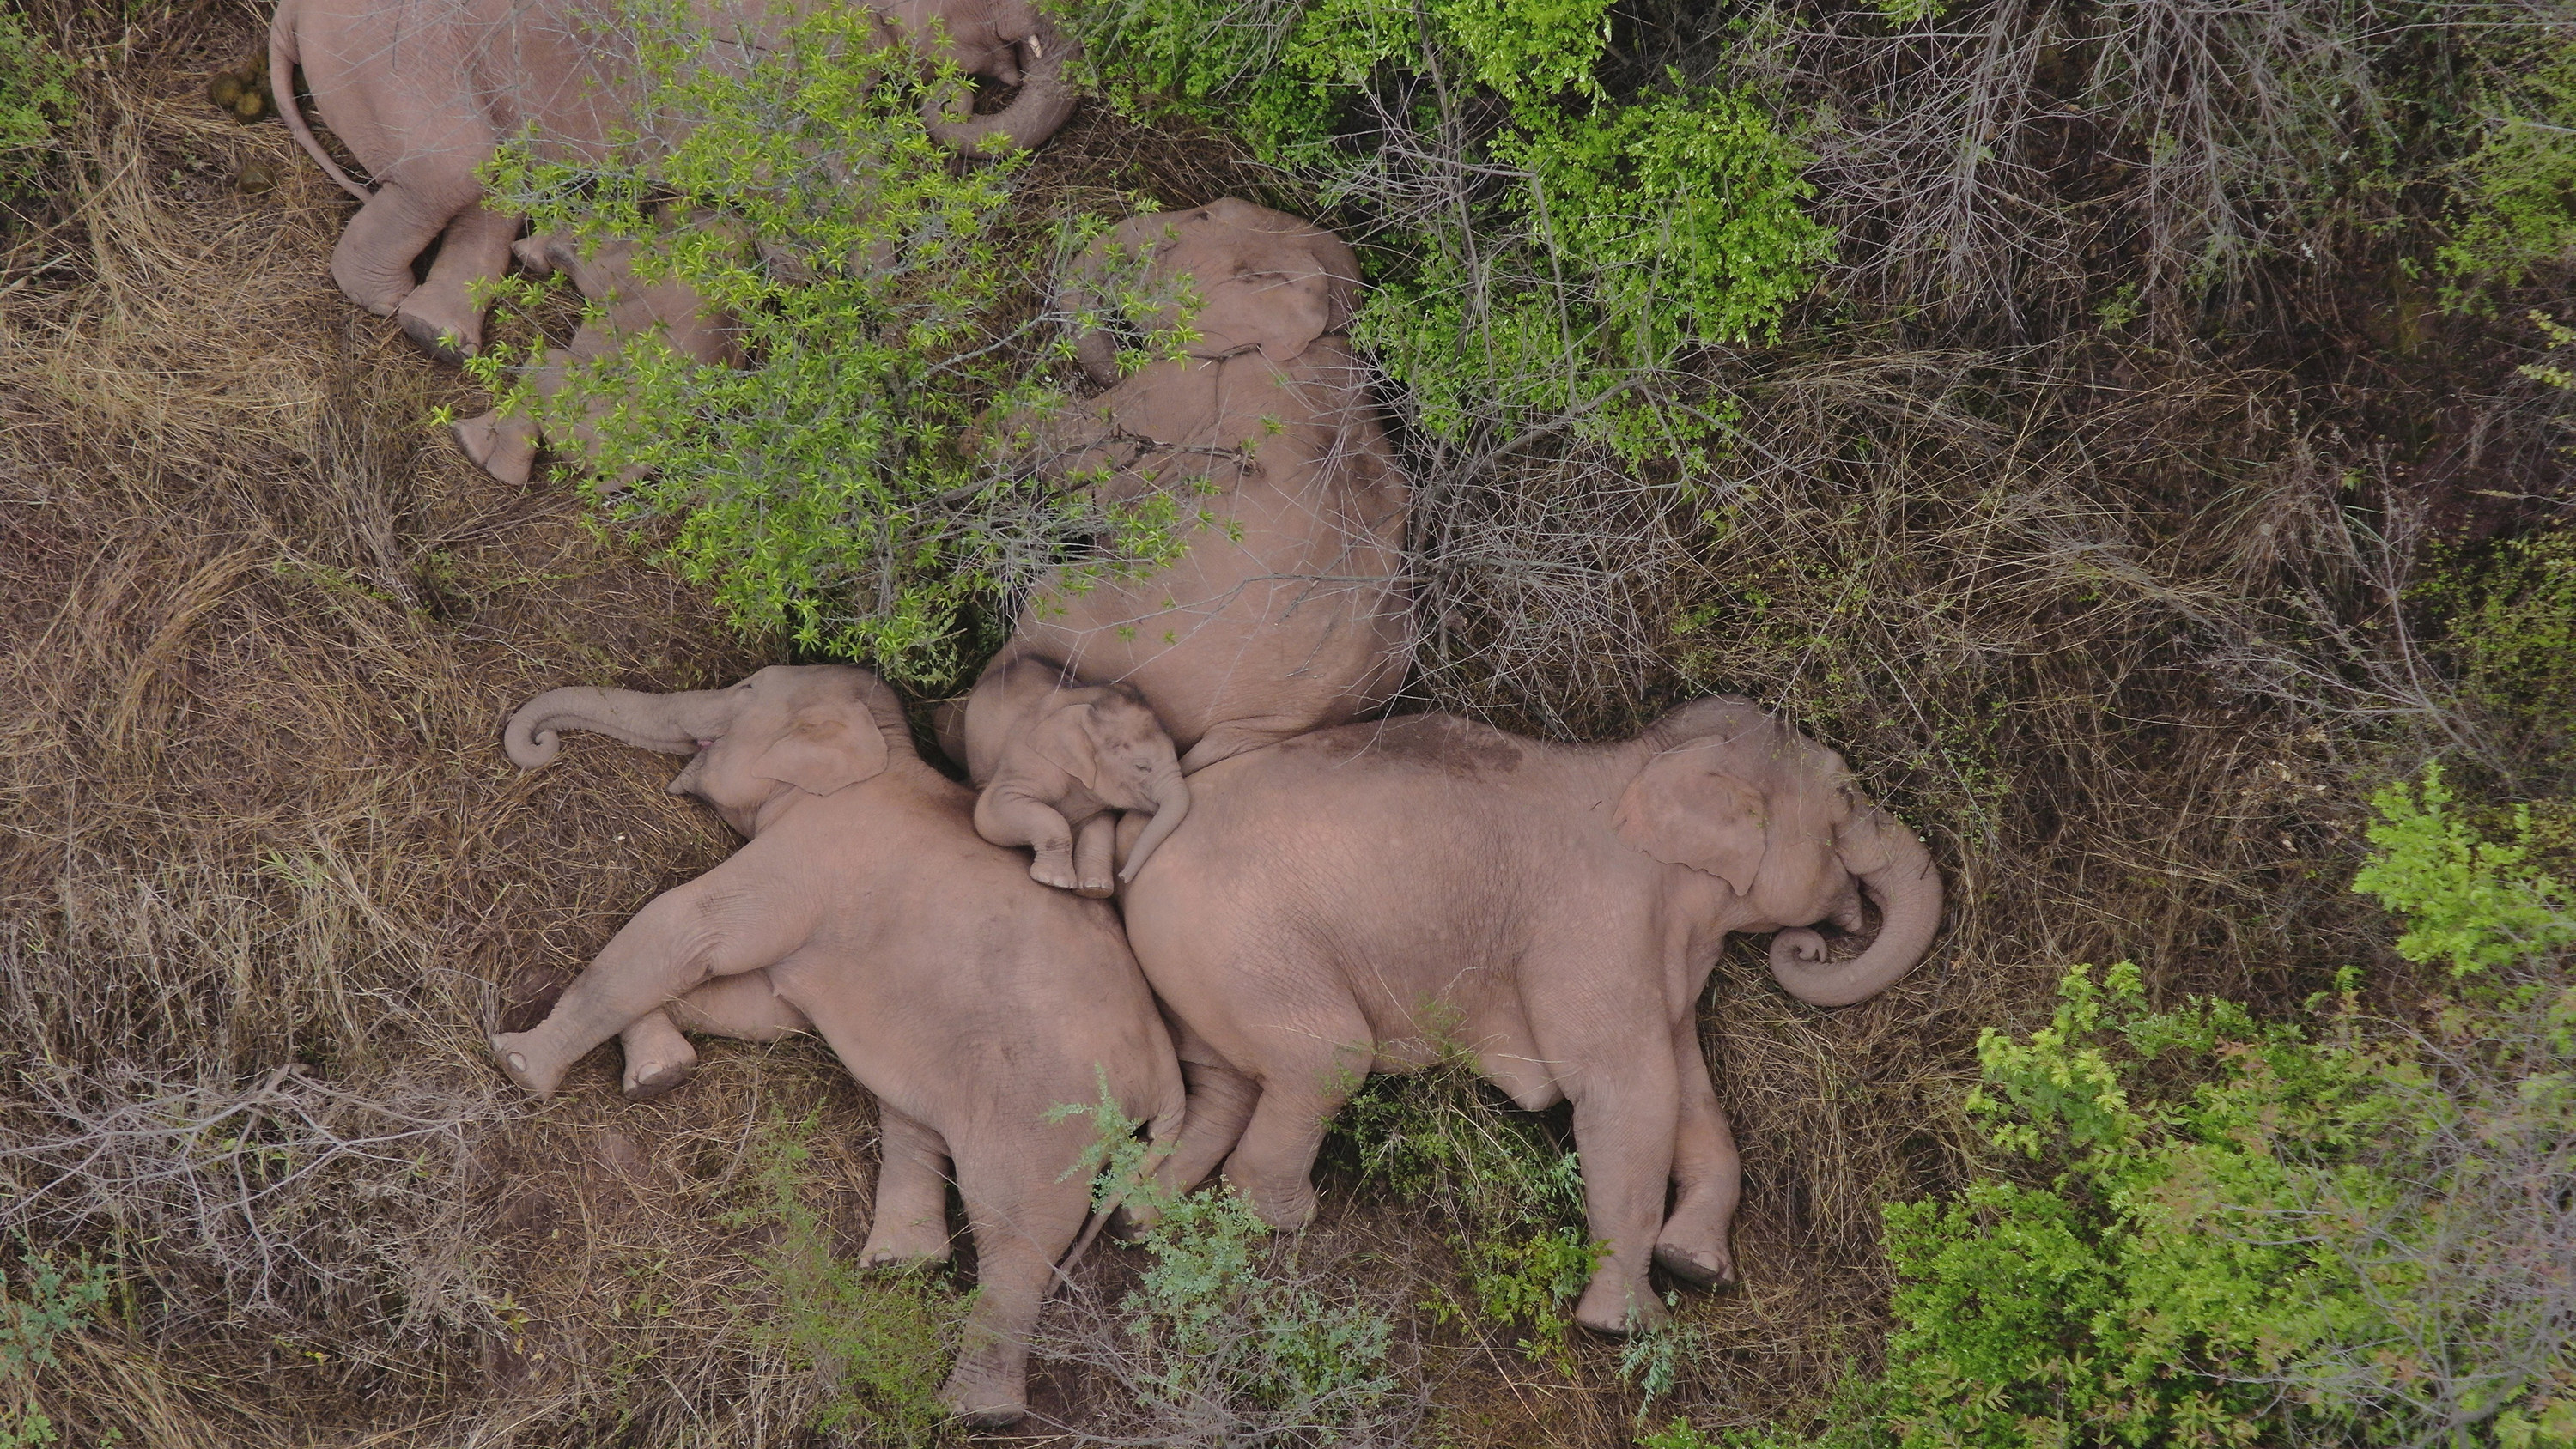 Four full grown elephants and two baby elephants sleep all together in a pile of brush, photographed from above